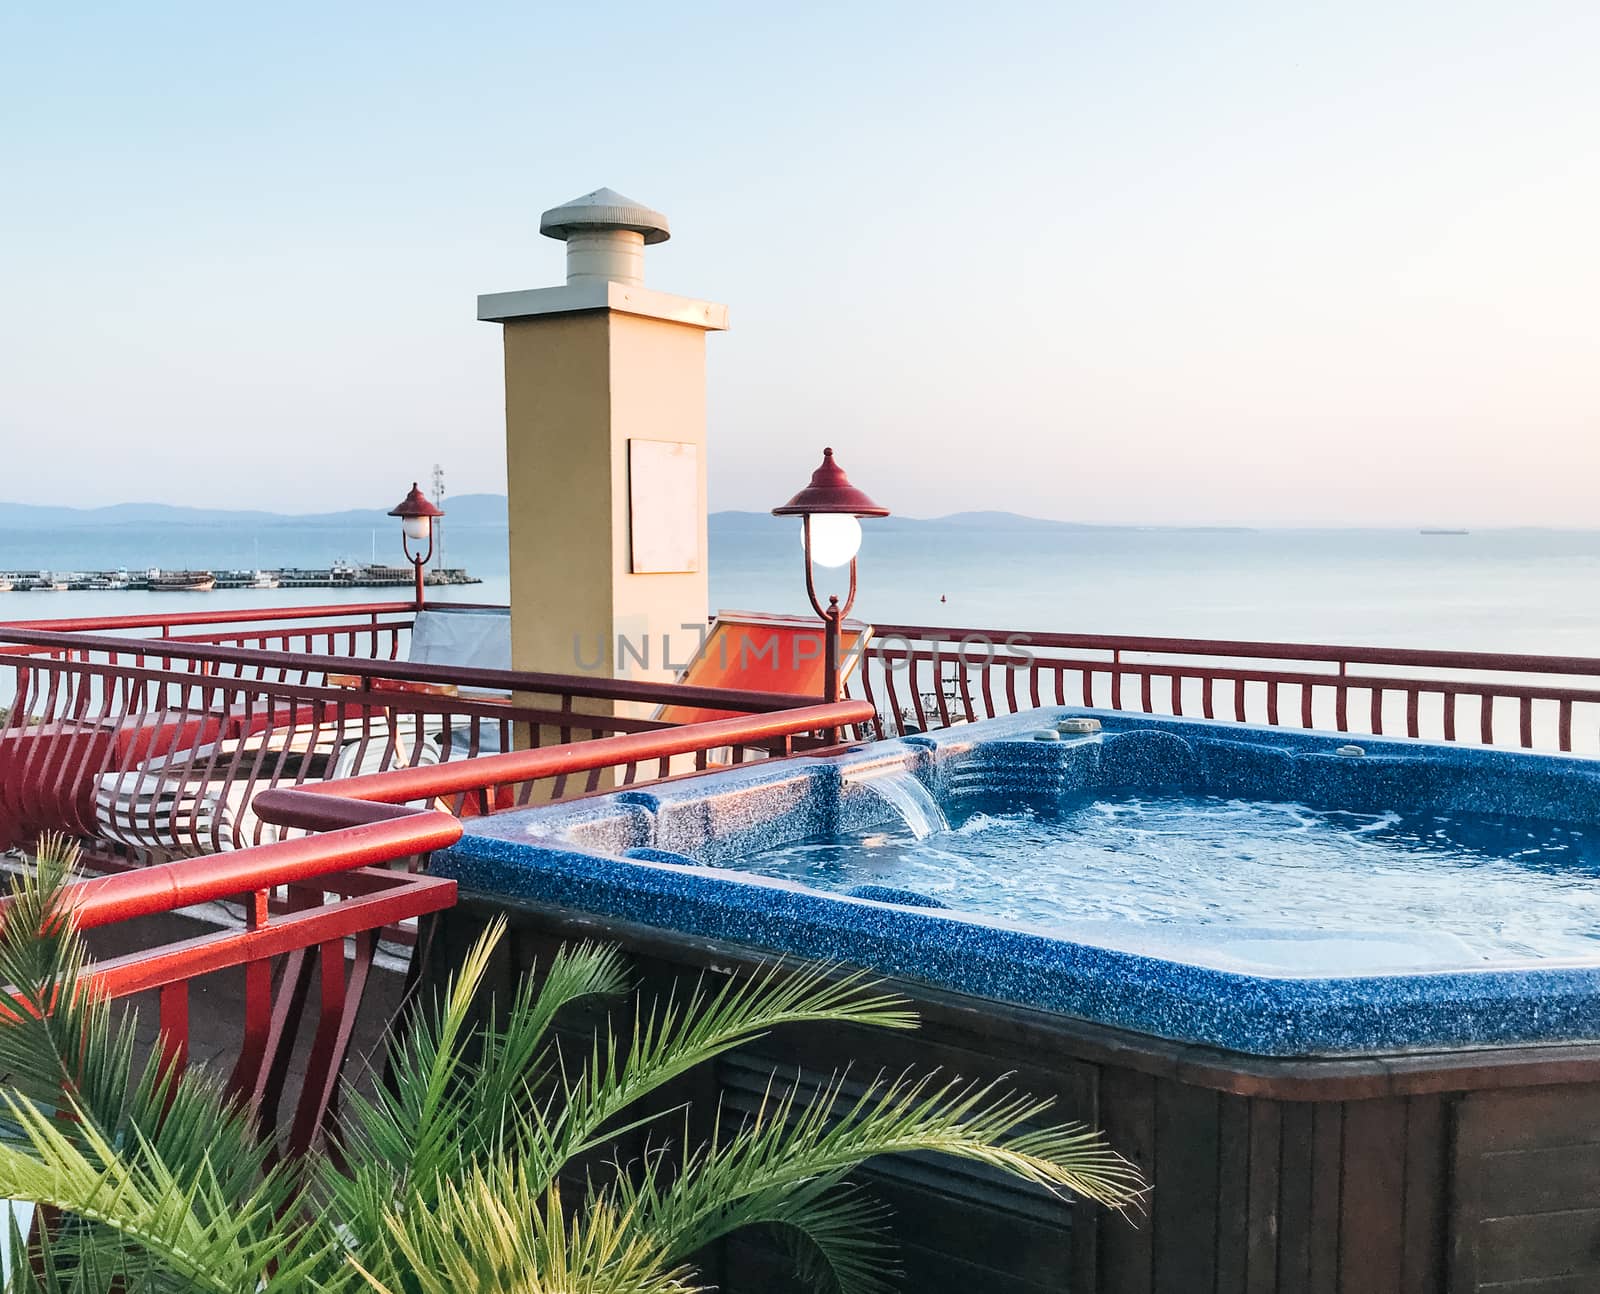 Terrace Jacuzzi With A Beautiful Sea View by nenovbrothers